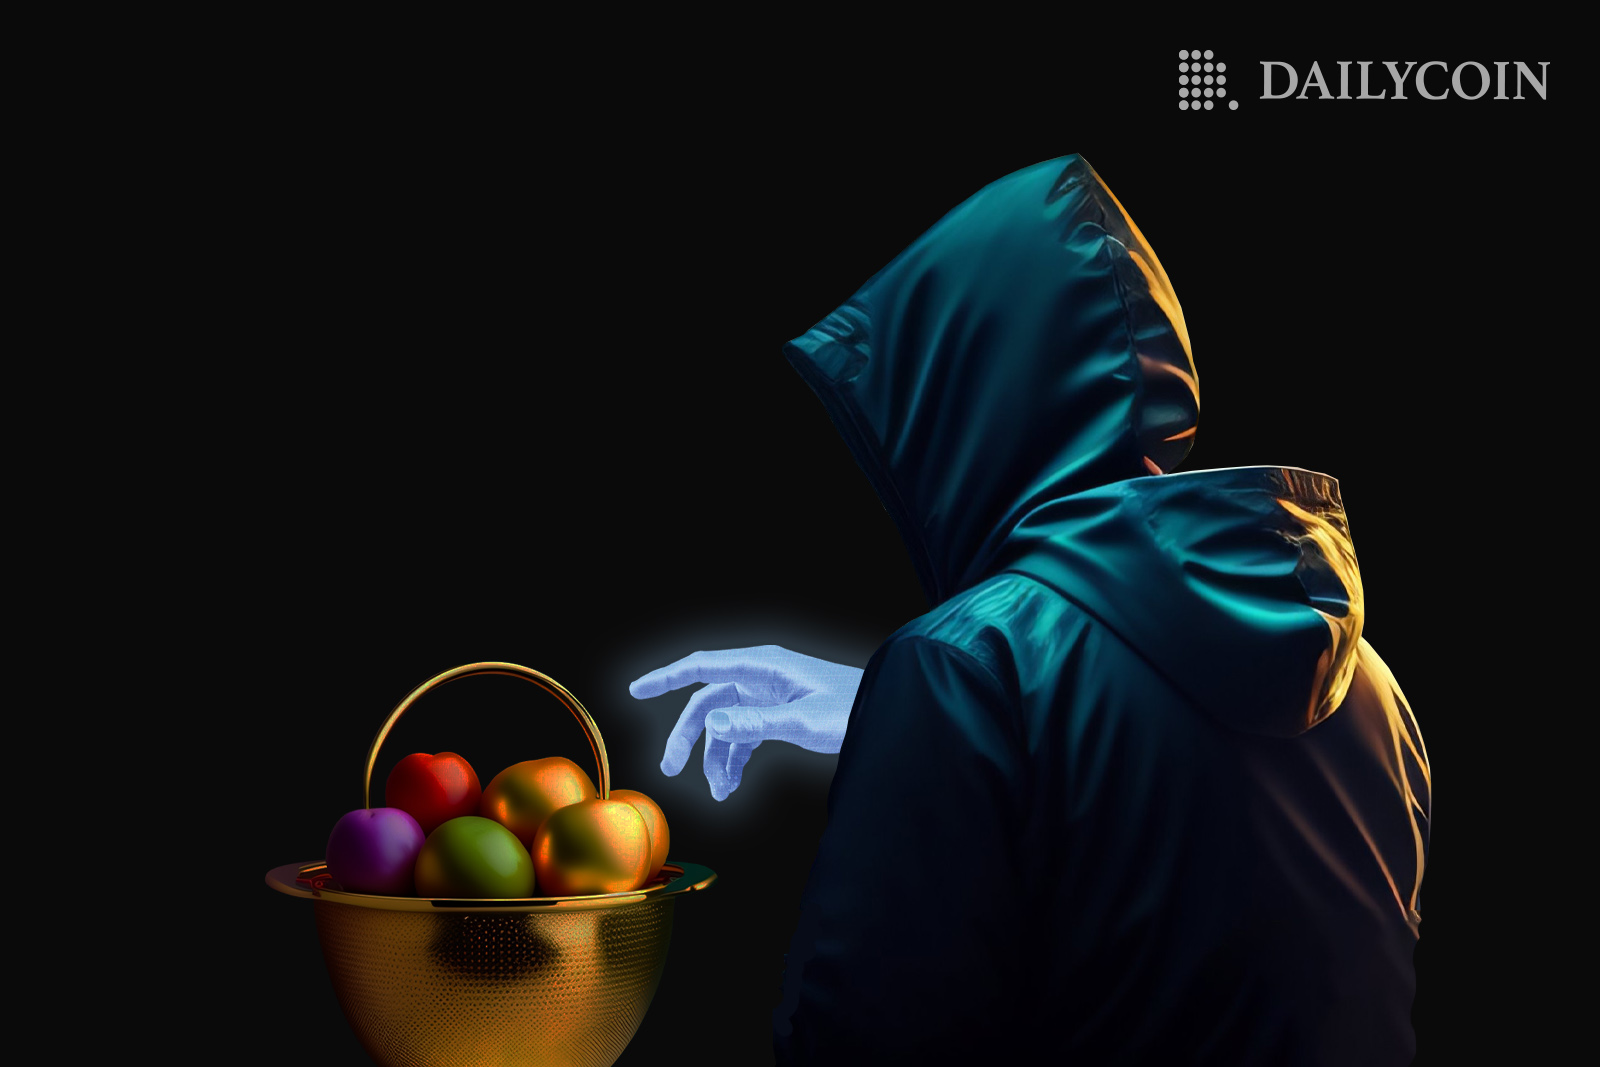 A man in hood is trying to get hold of some colourful fruits.